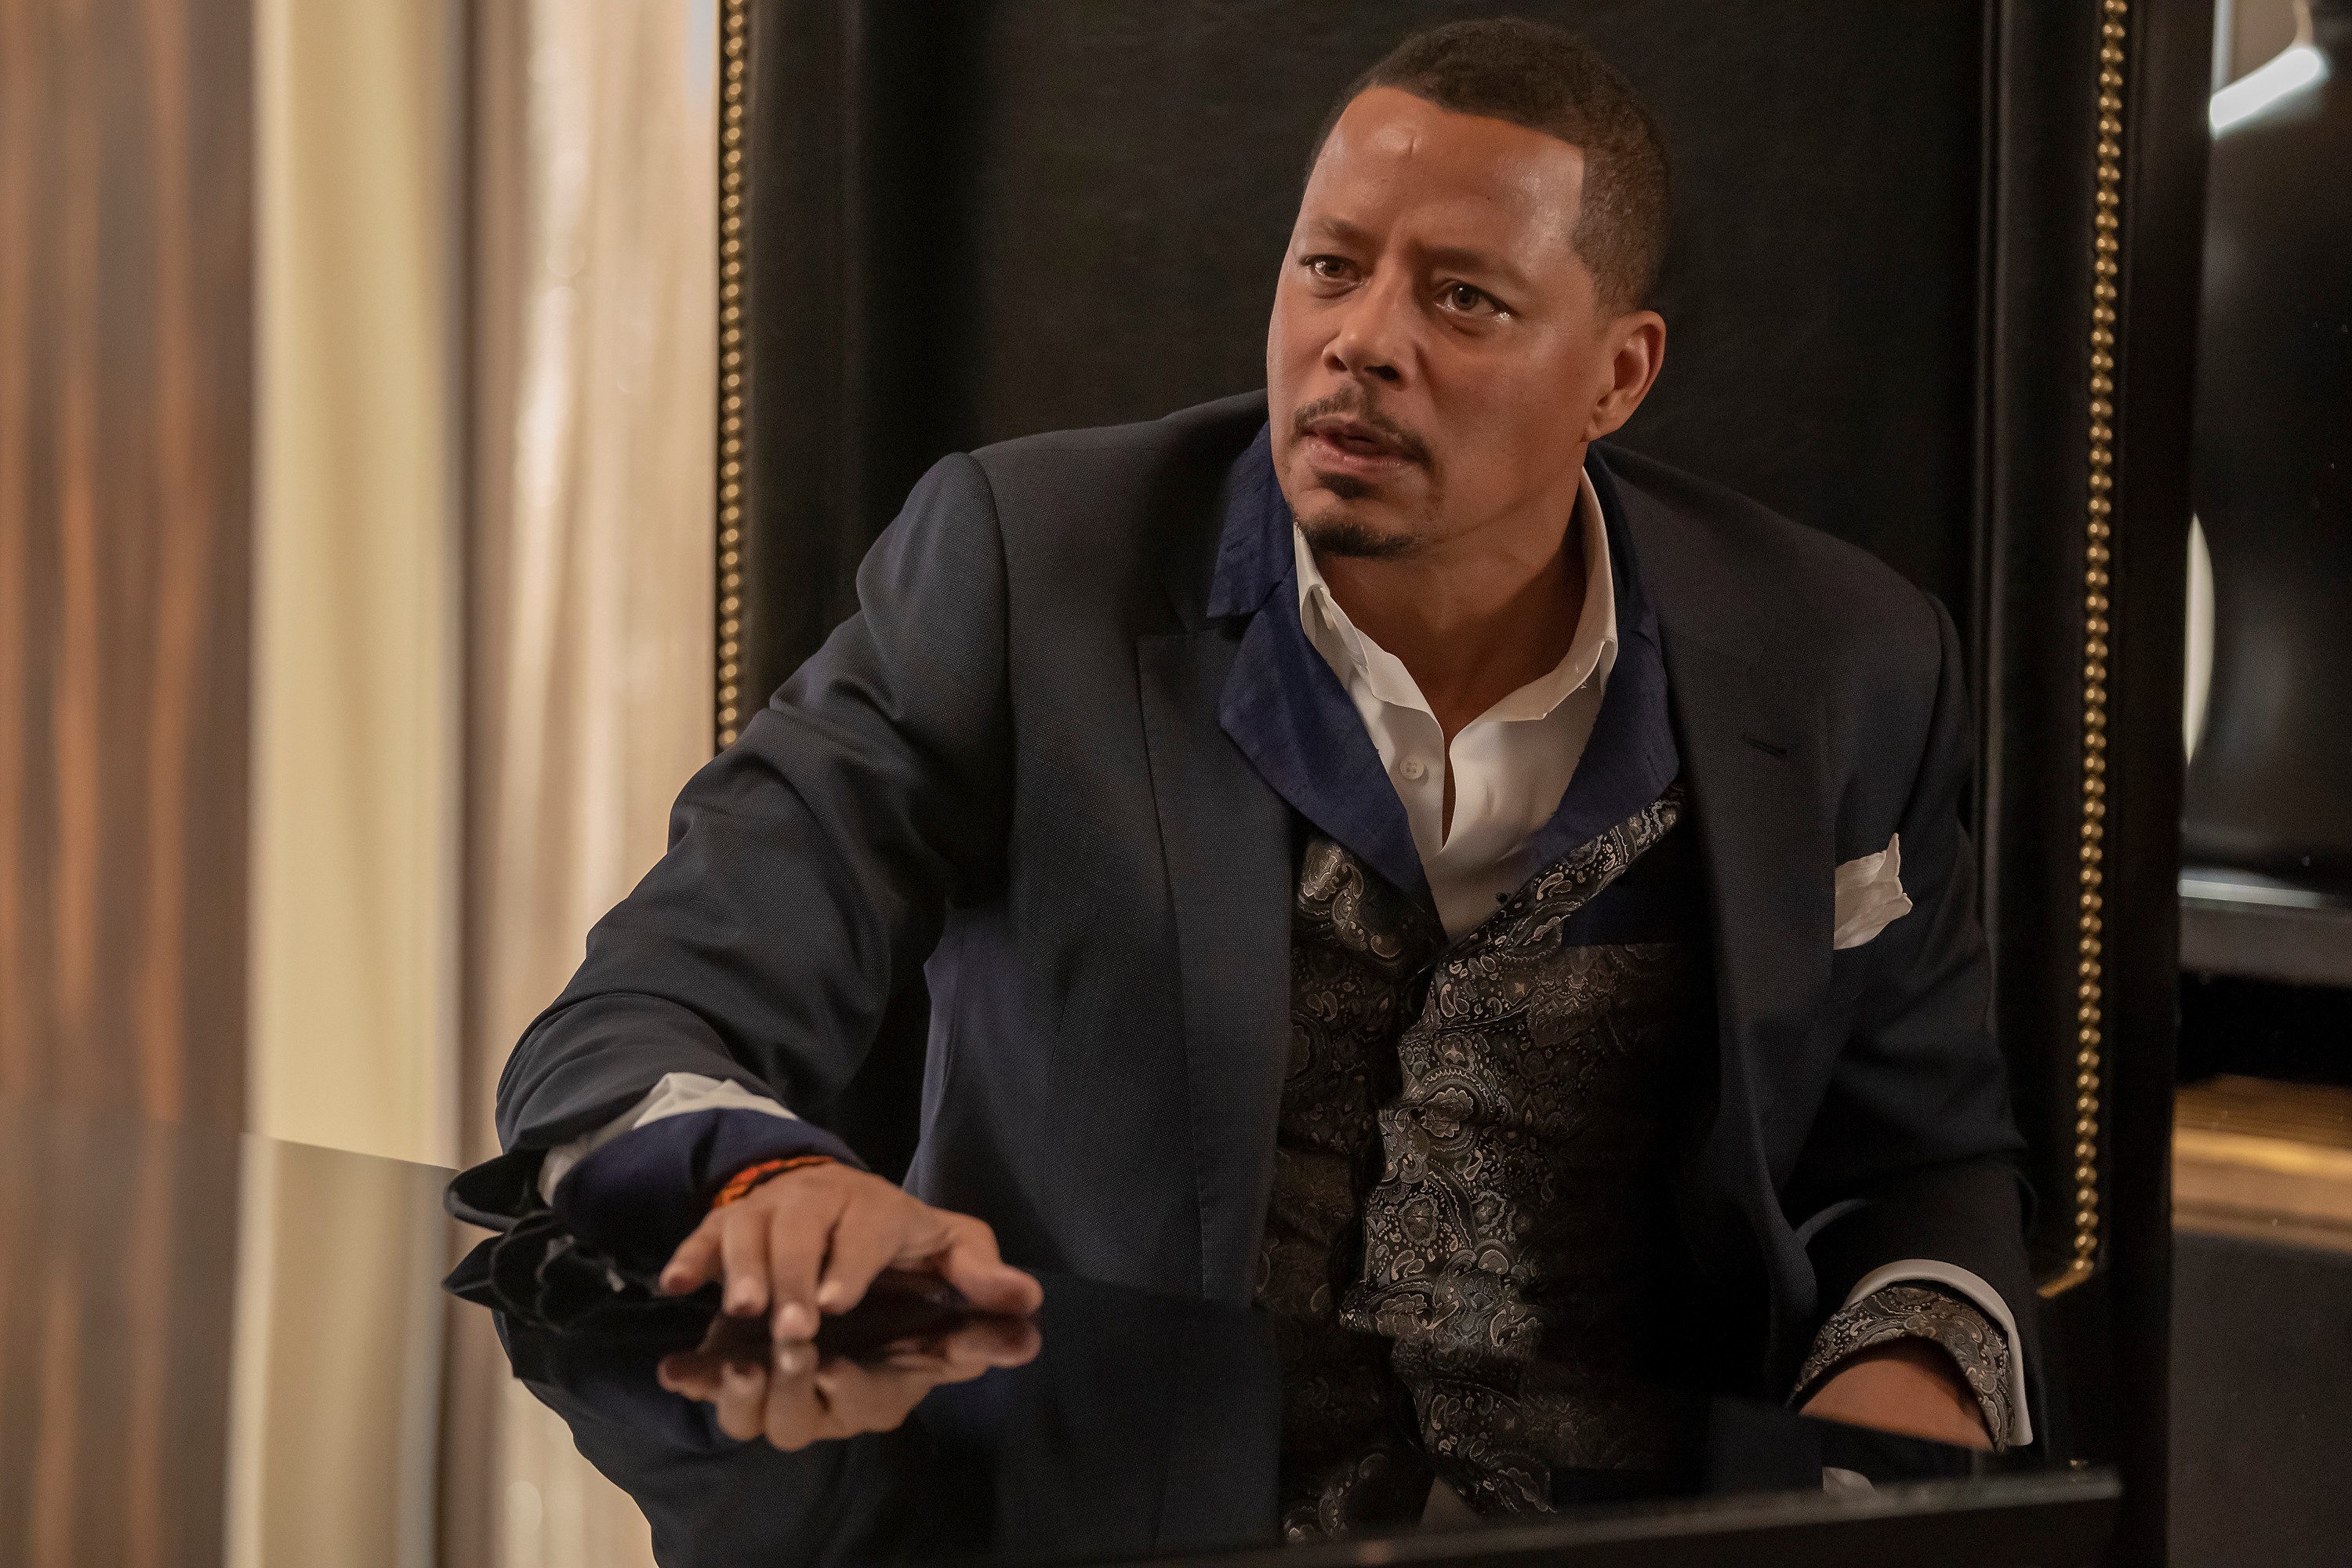 Terrence Howard Says He Developed 'New Hydrogen Technology